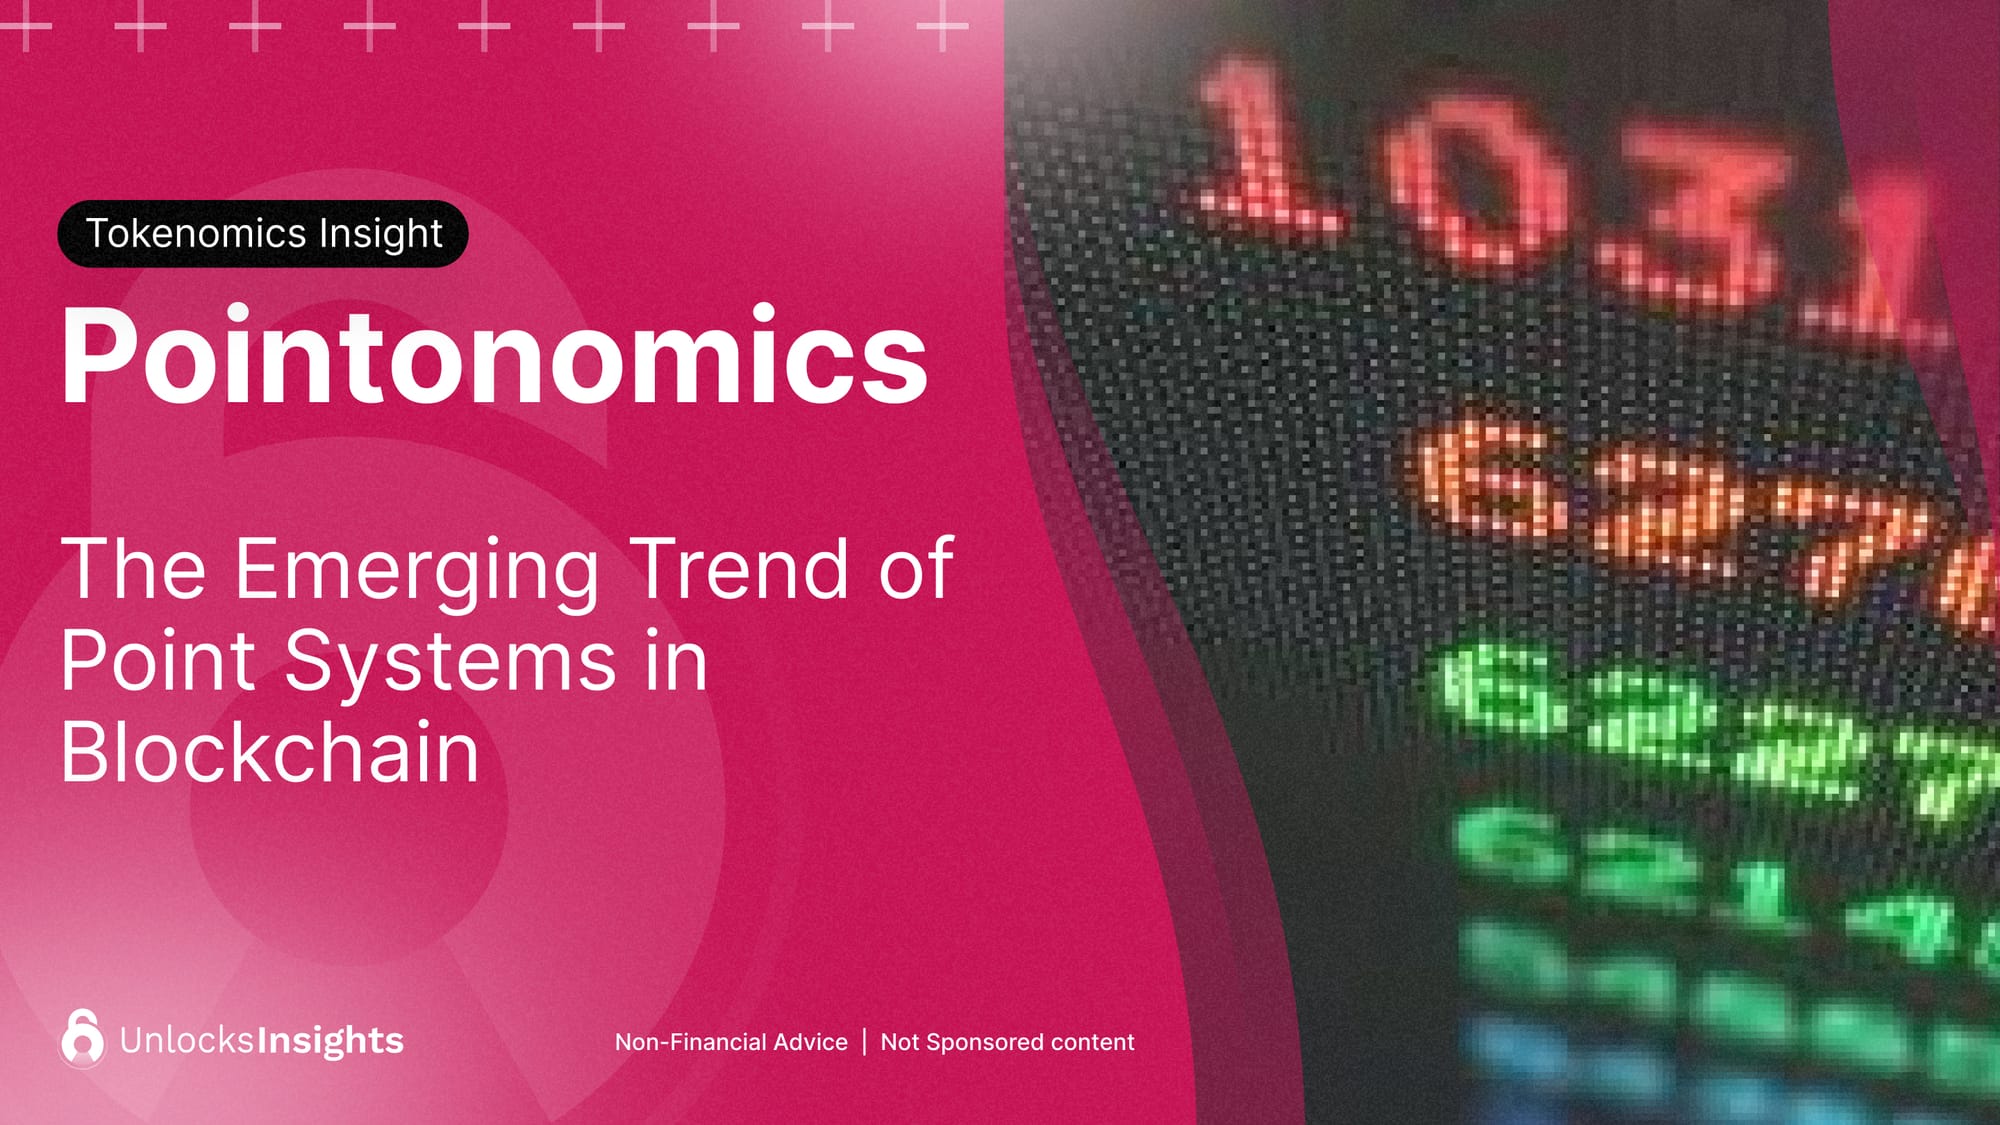 Pointonomics: The Emerging Trend of Point Systems in Blockchain